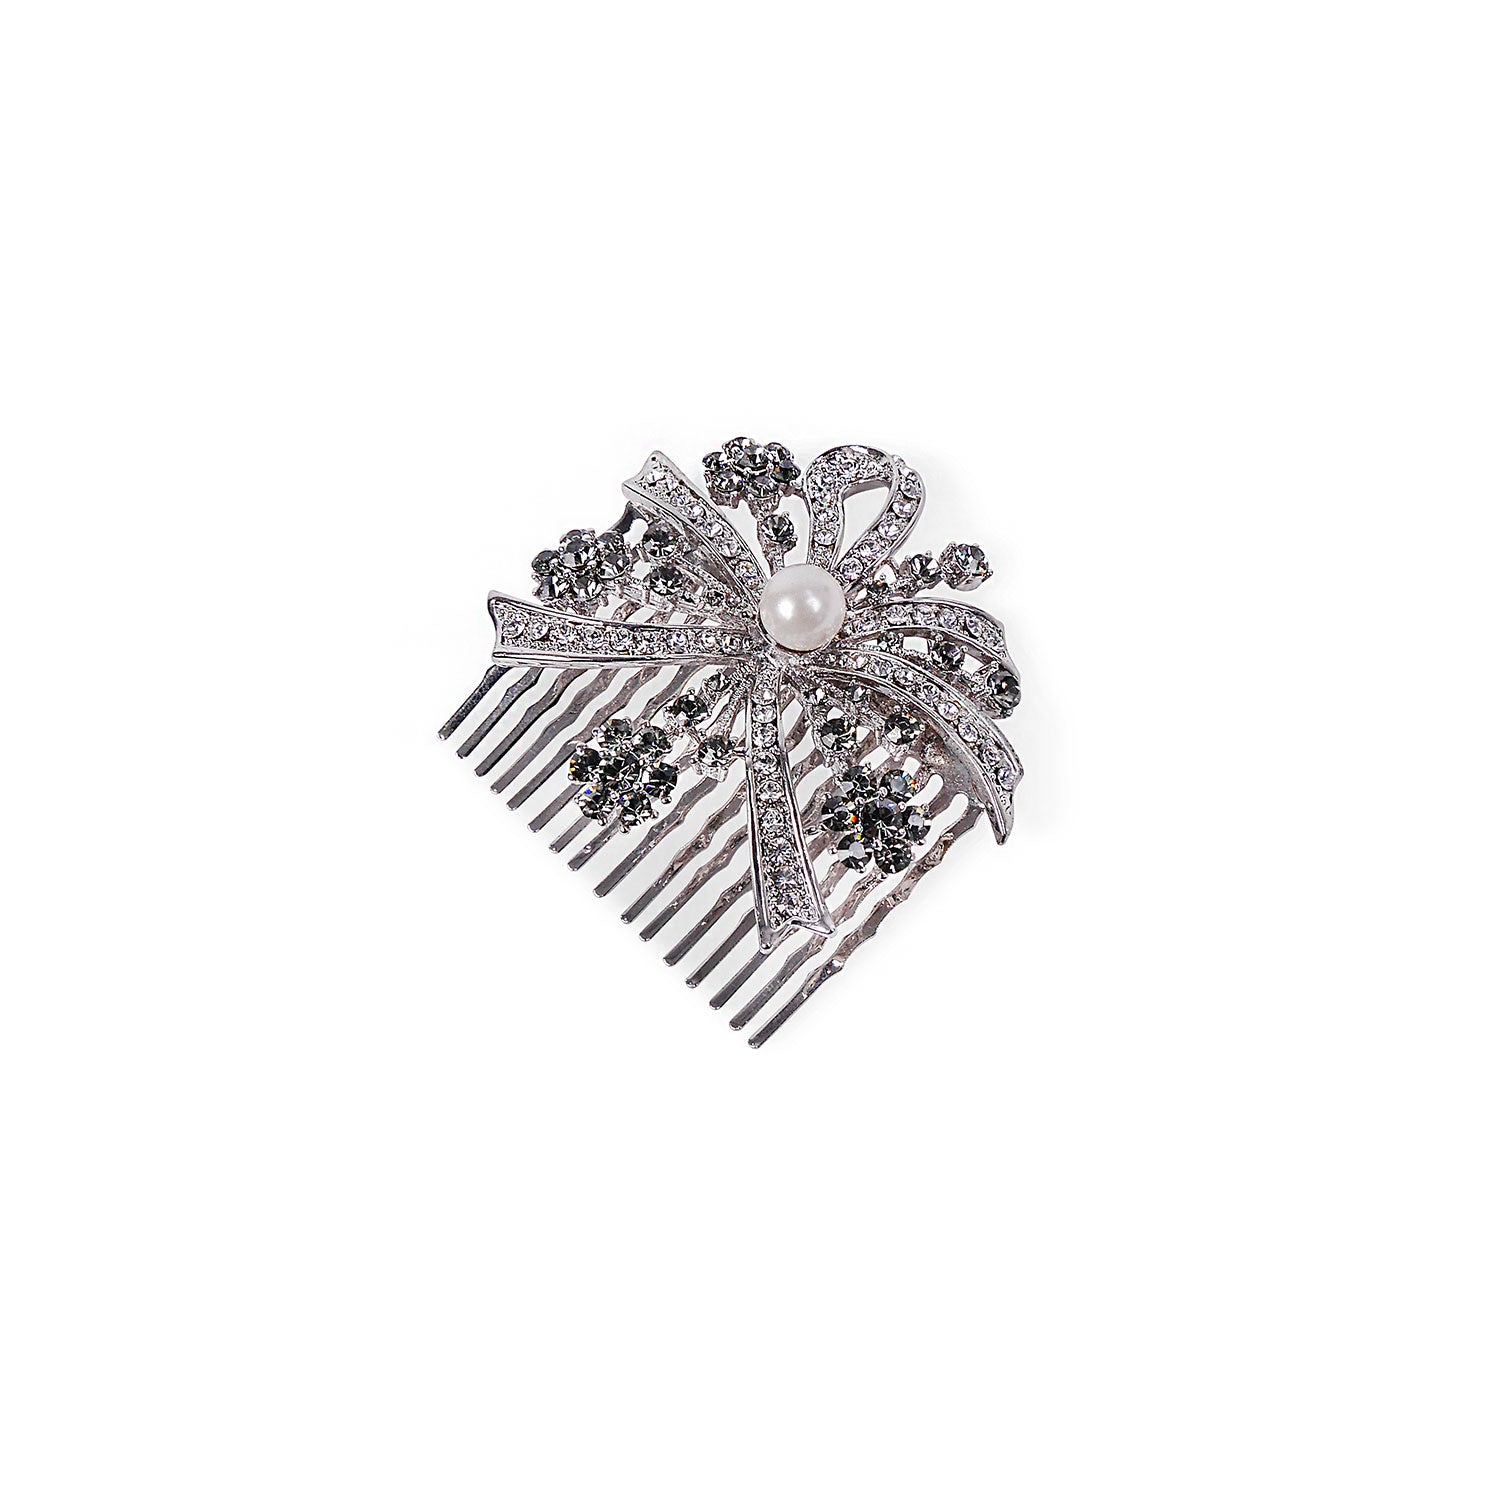 Alora Hair Comb in Black and White